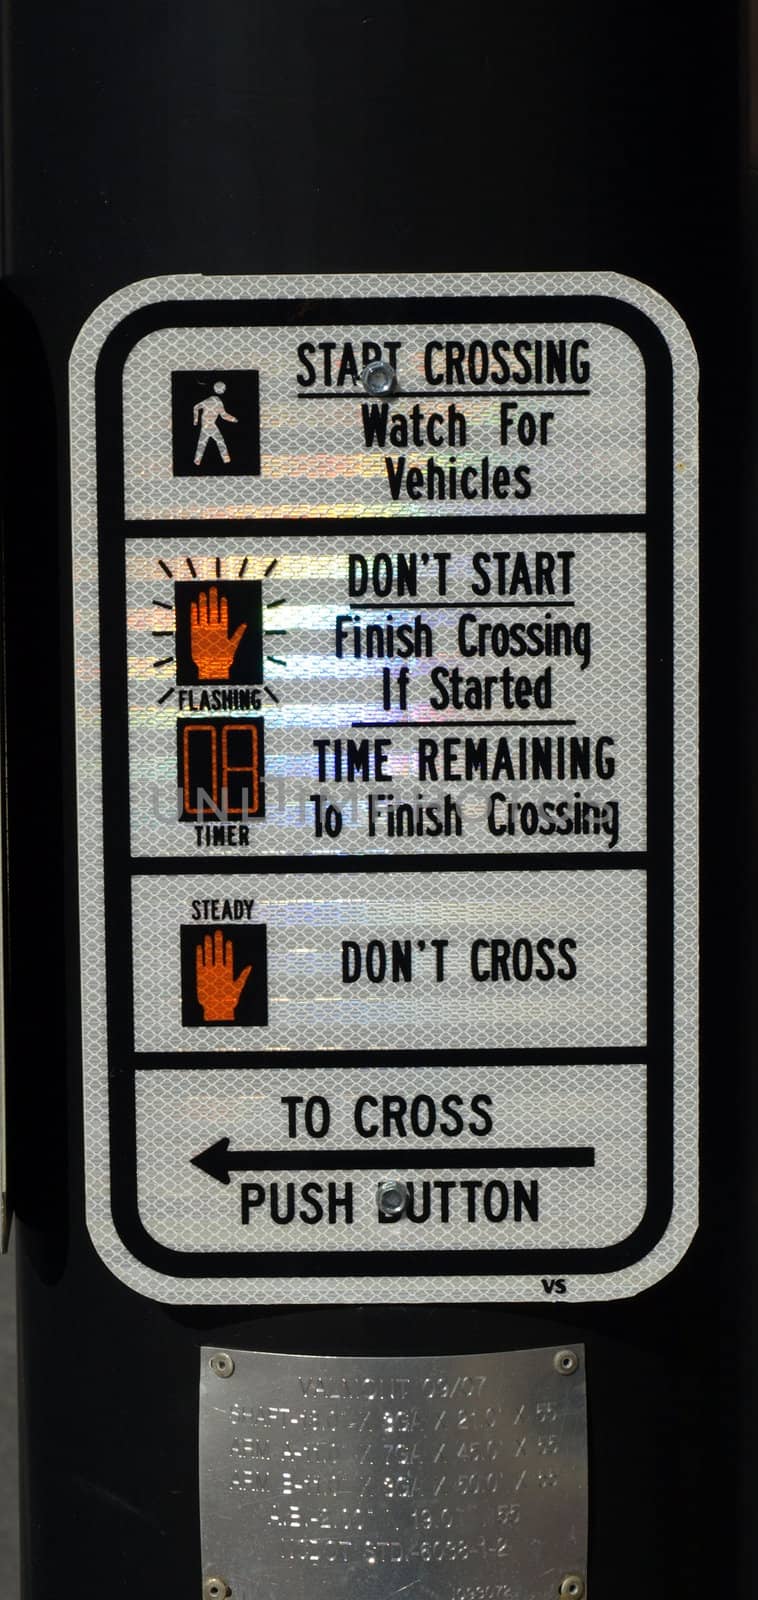 A street crossing sign at a busy intersection